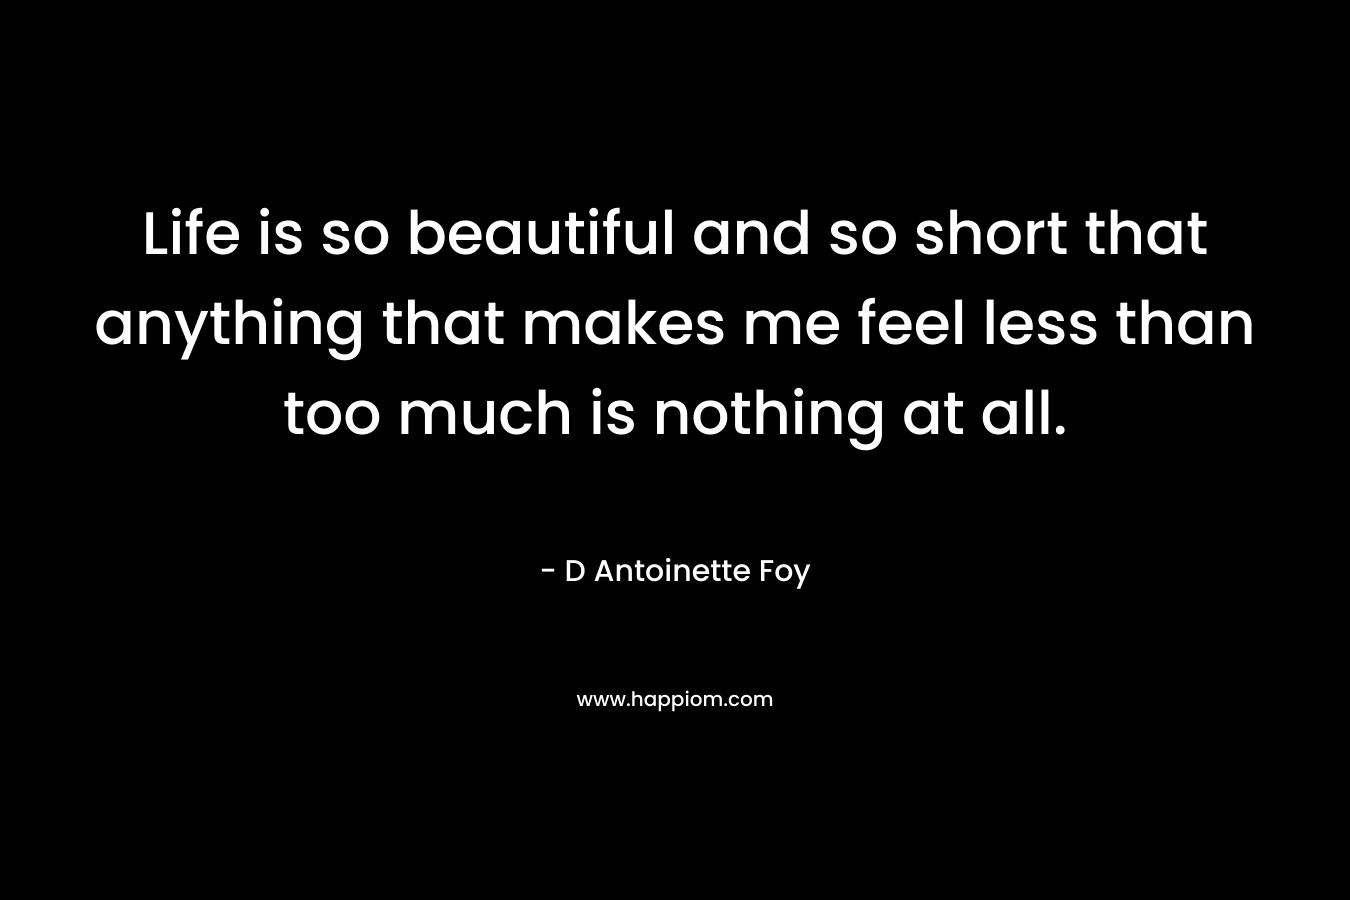 Life is so beautiful and so short that anything that makes me feel less than too much is nothing at all. – D Antoinette Foy